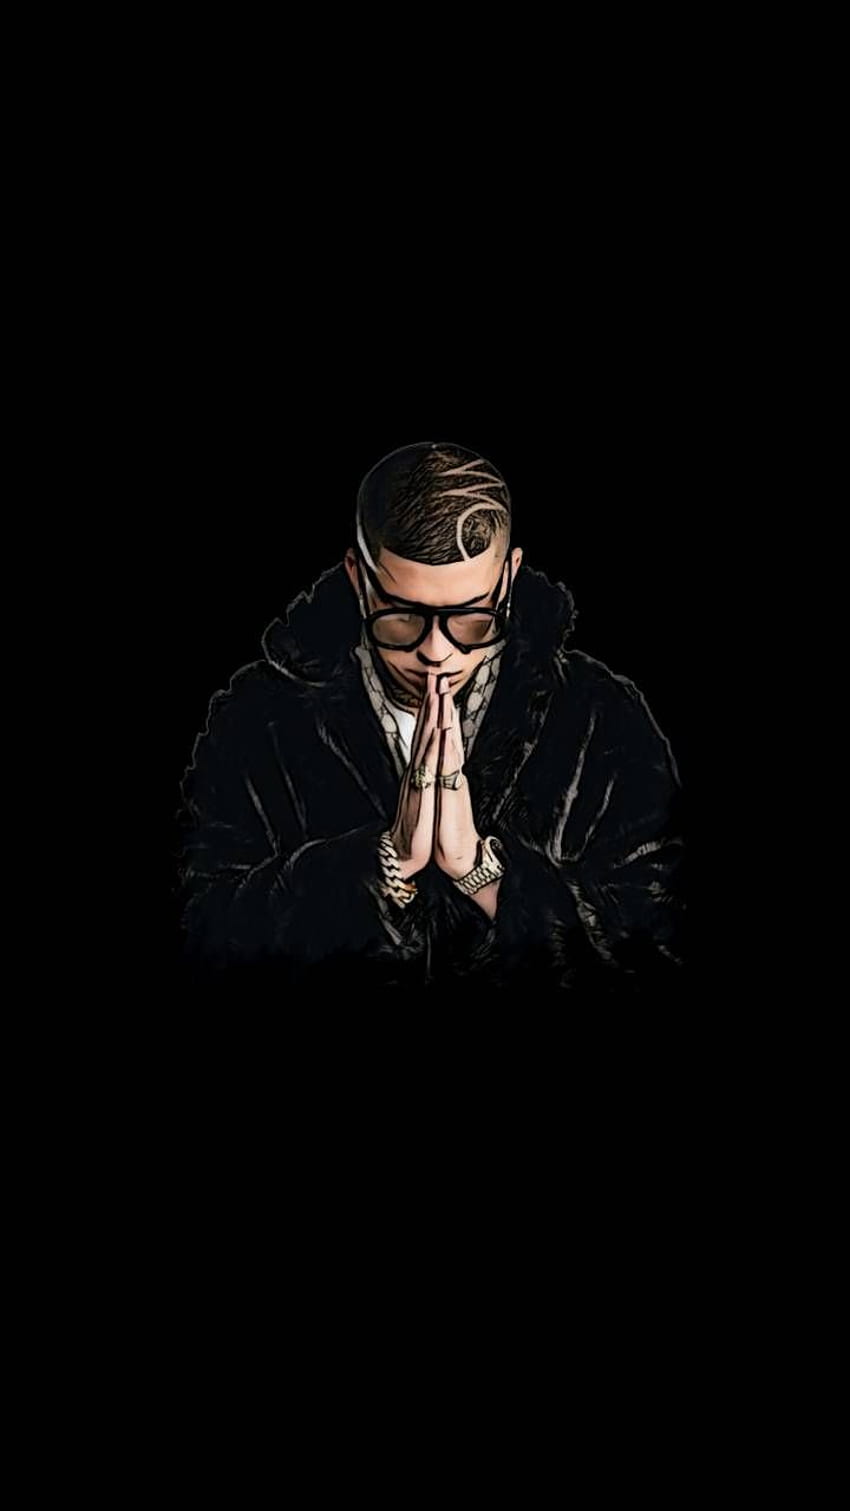 A man with glasses and black clothing praying - Bad Bunny